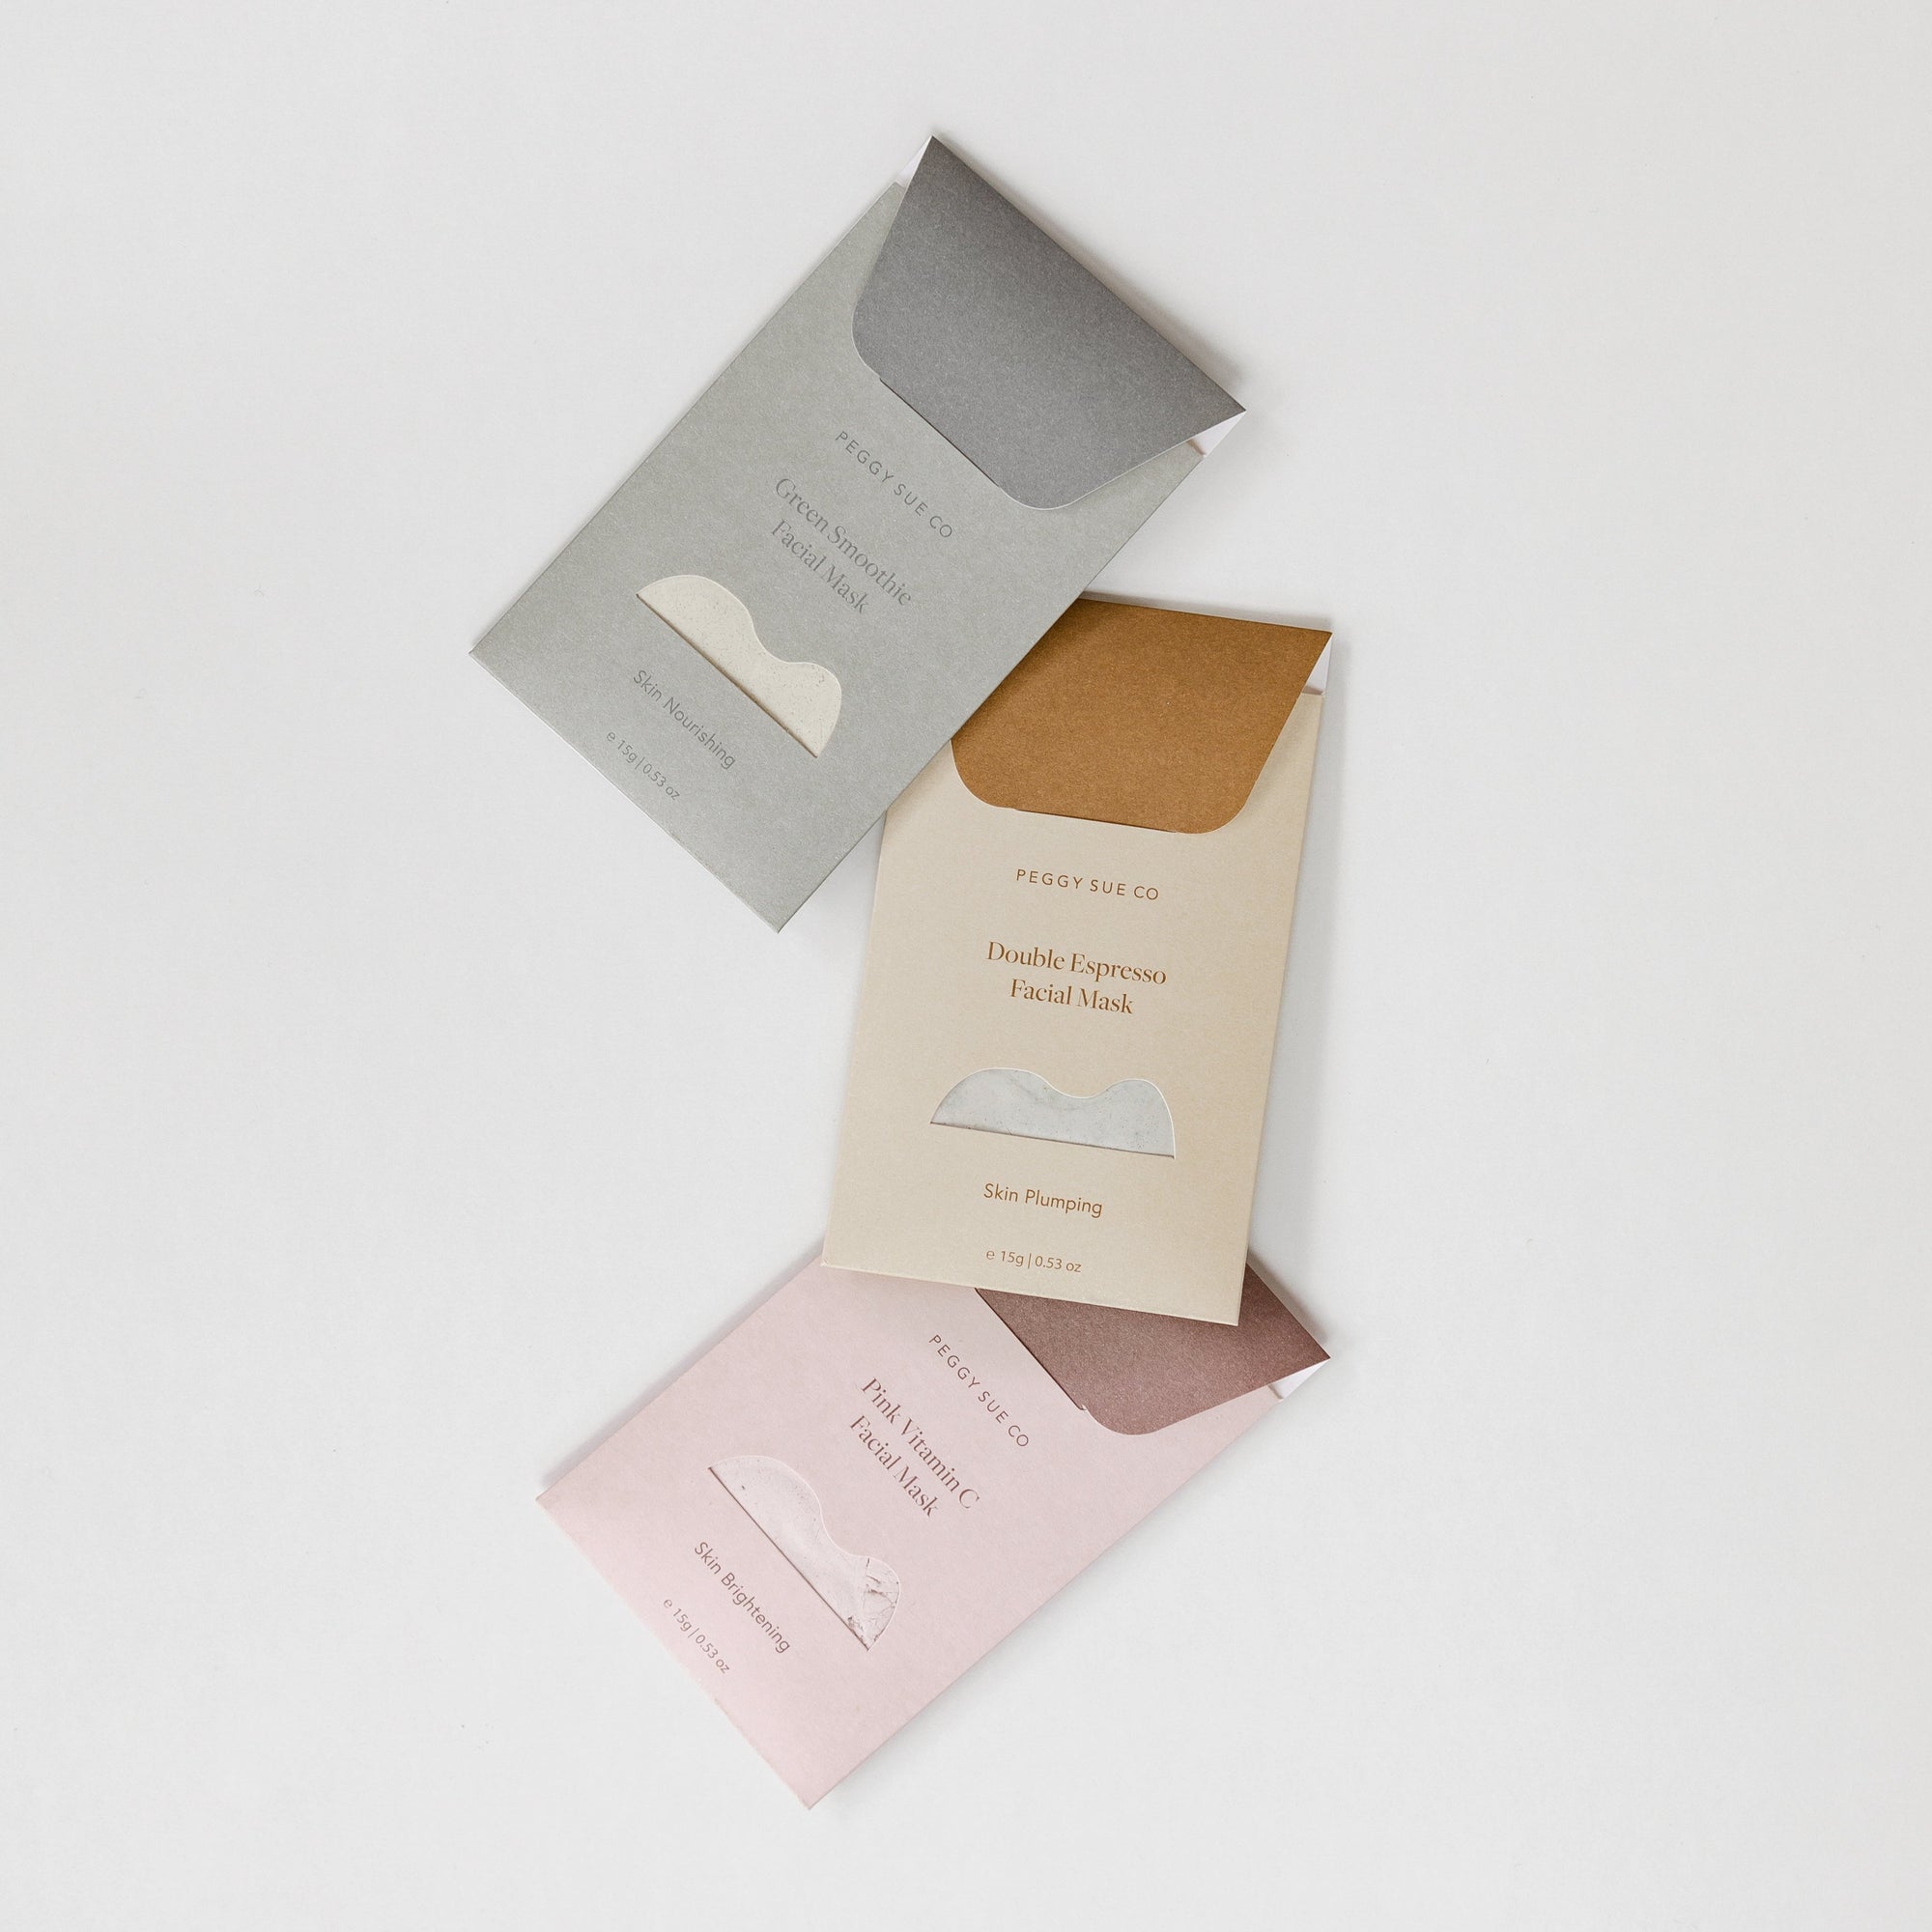 Three different types of biglittlegifting face mask kits on a white surface.